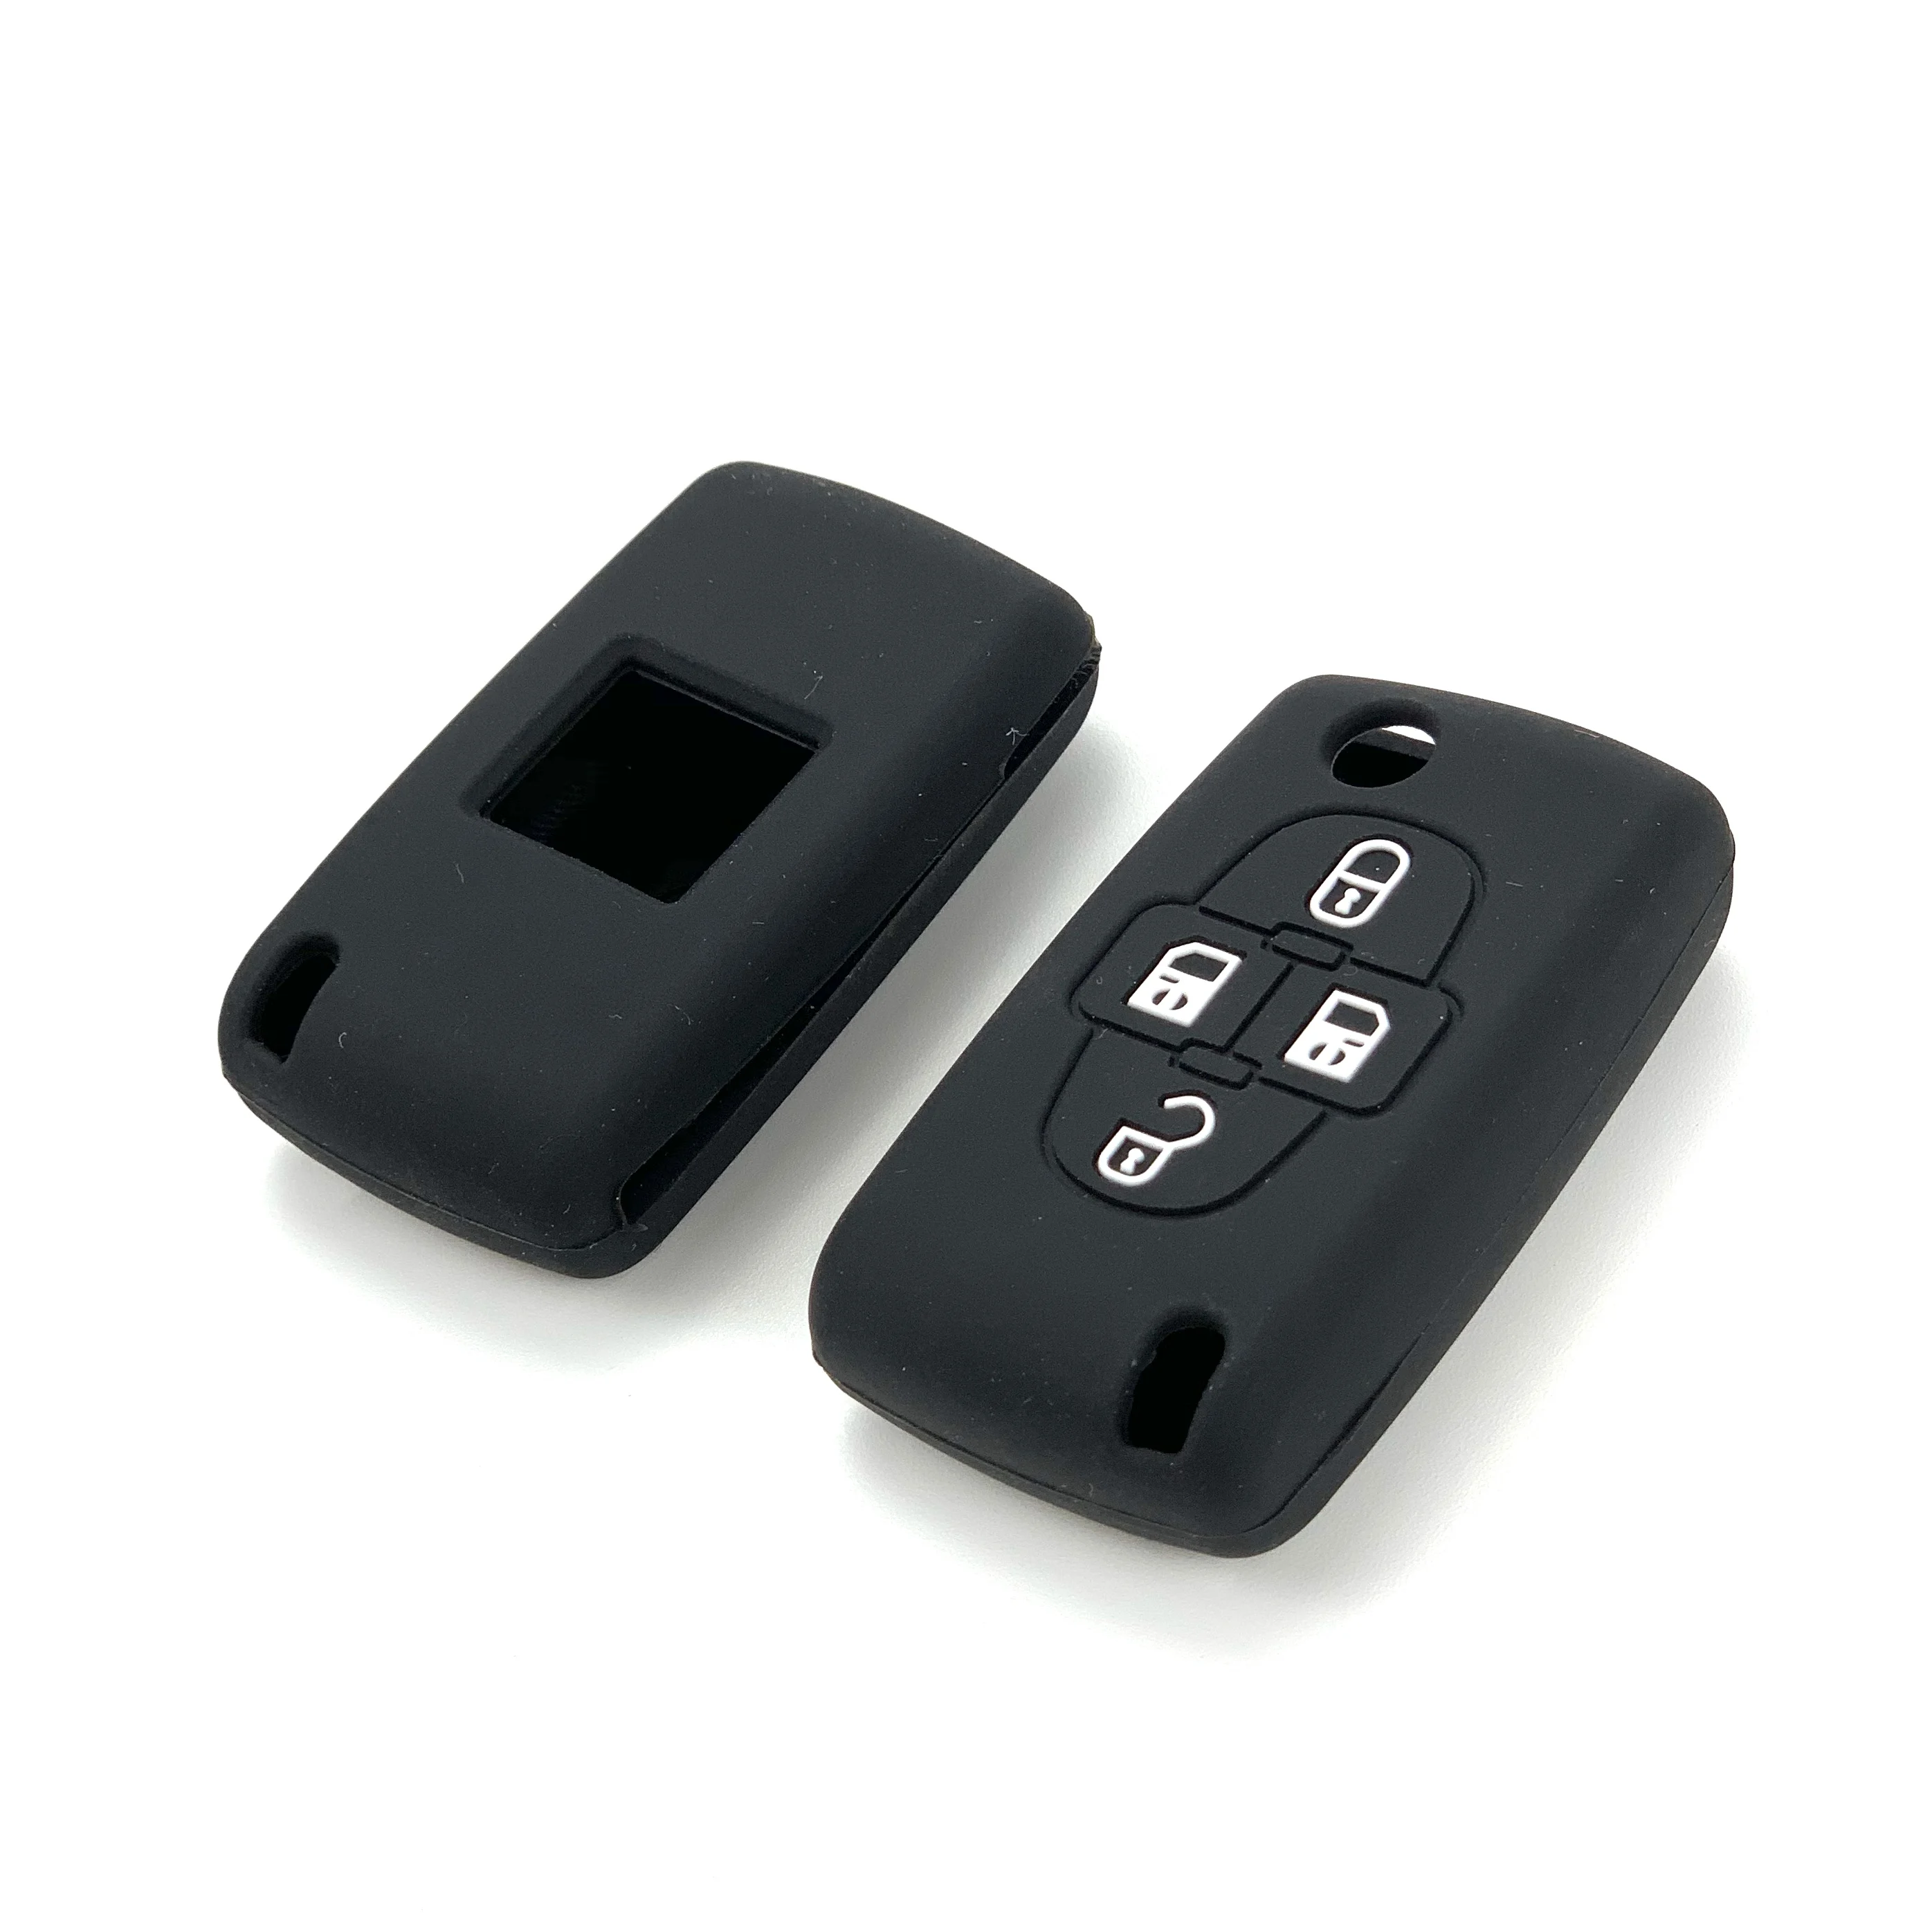 

4 Button Silicone Car Remote Key Fob Shell Cover Case For For Peugeot 1008 807 Citroen C8 Skin Holder 2007 2008 2009